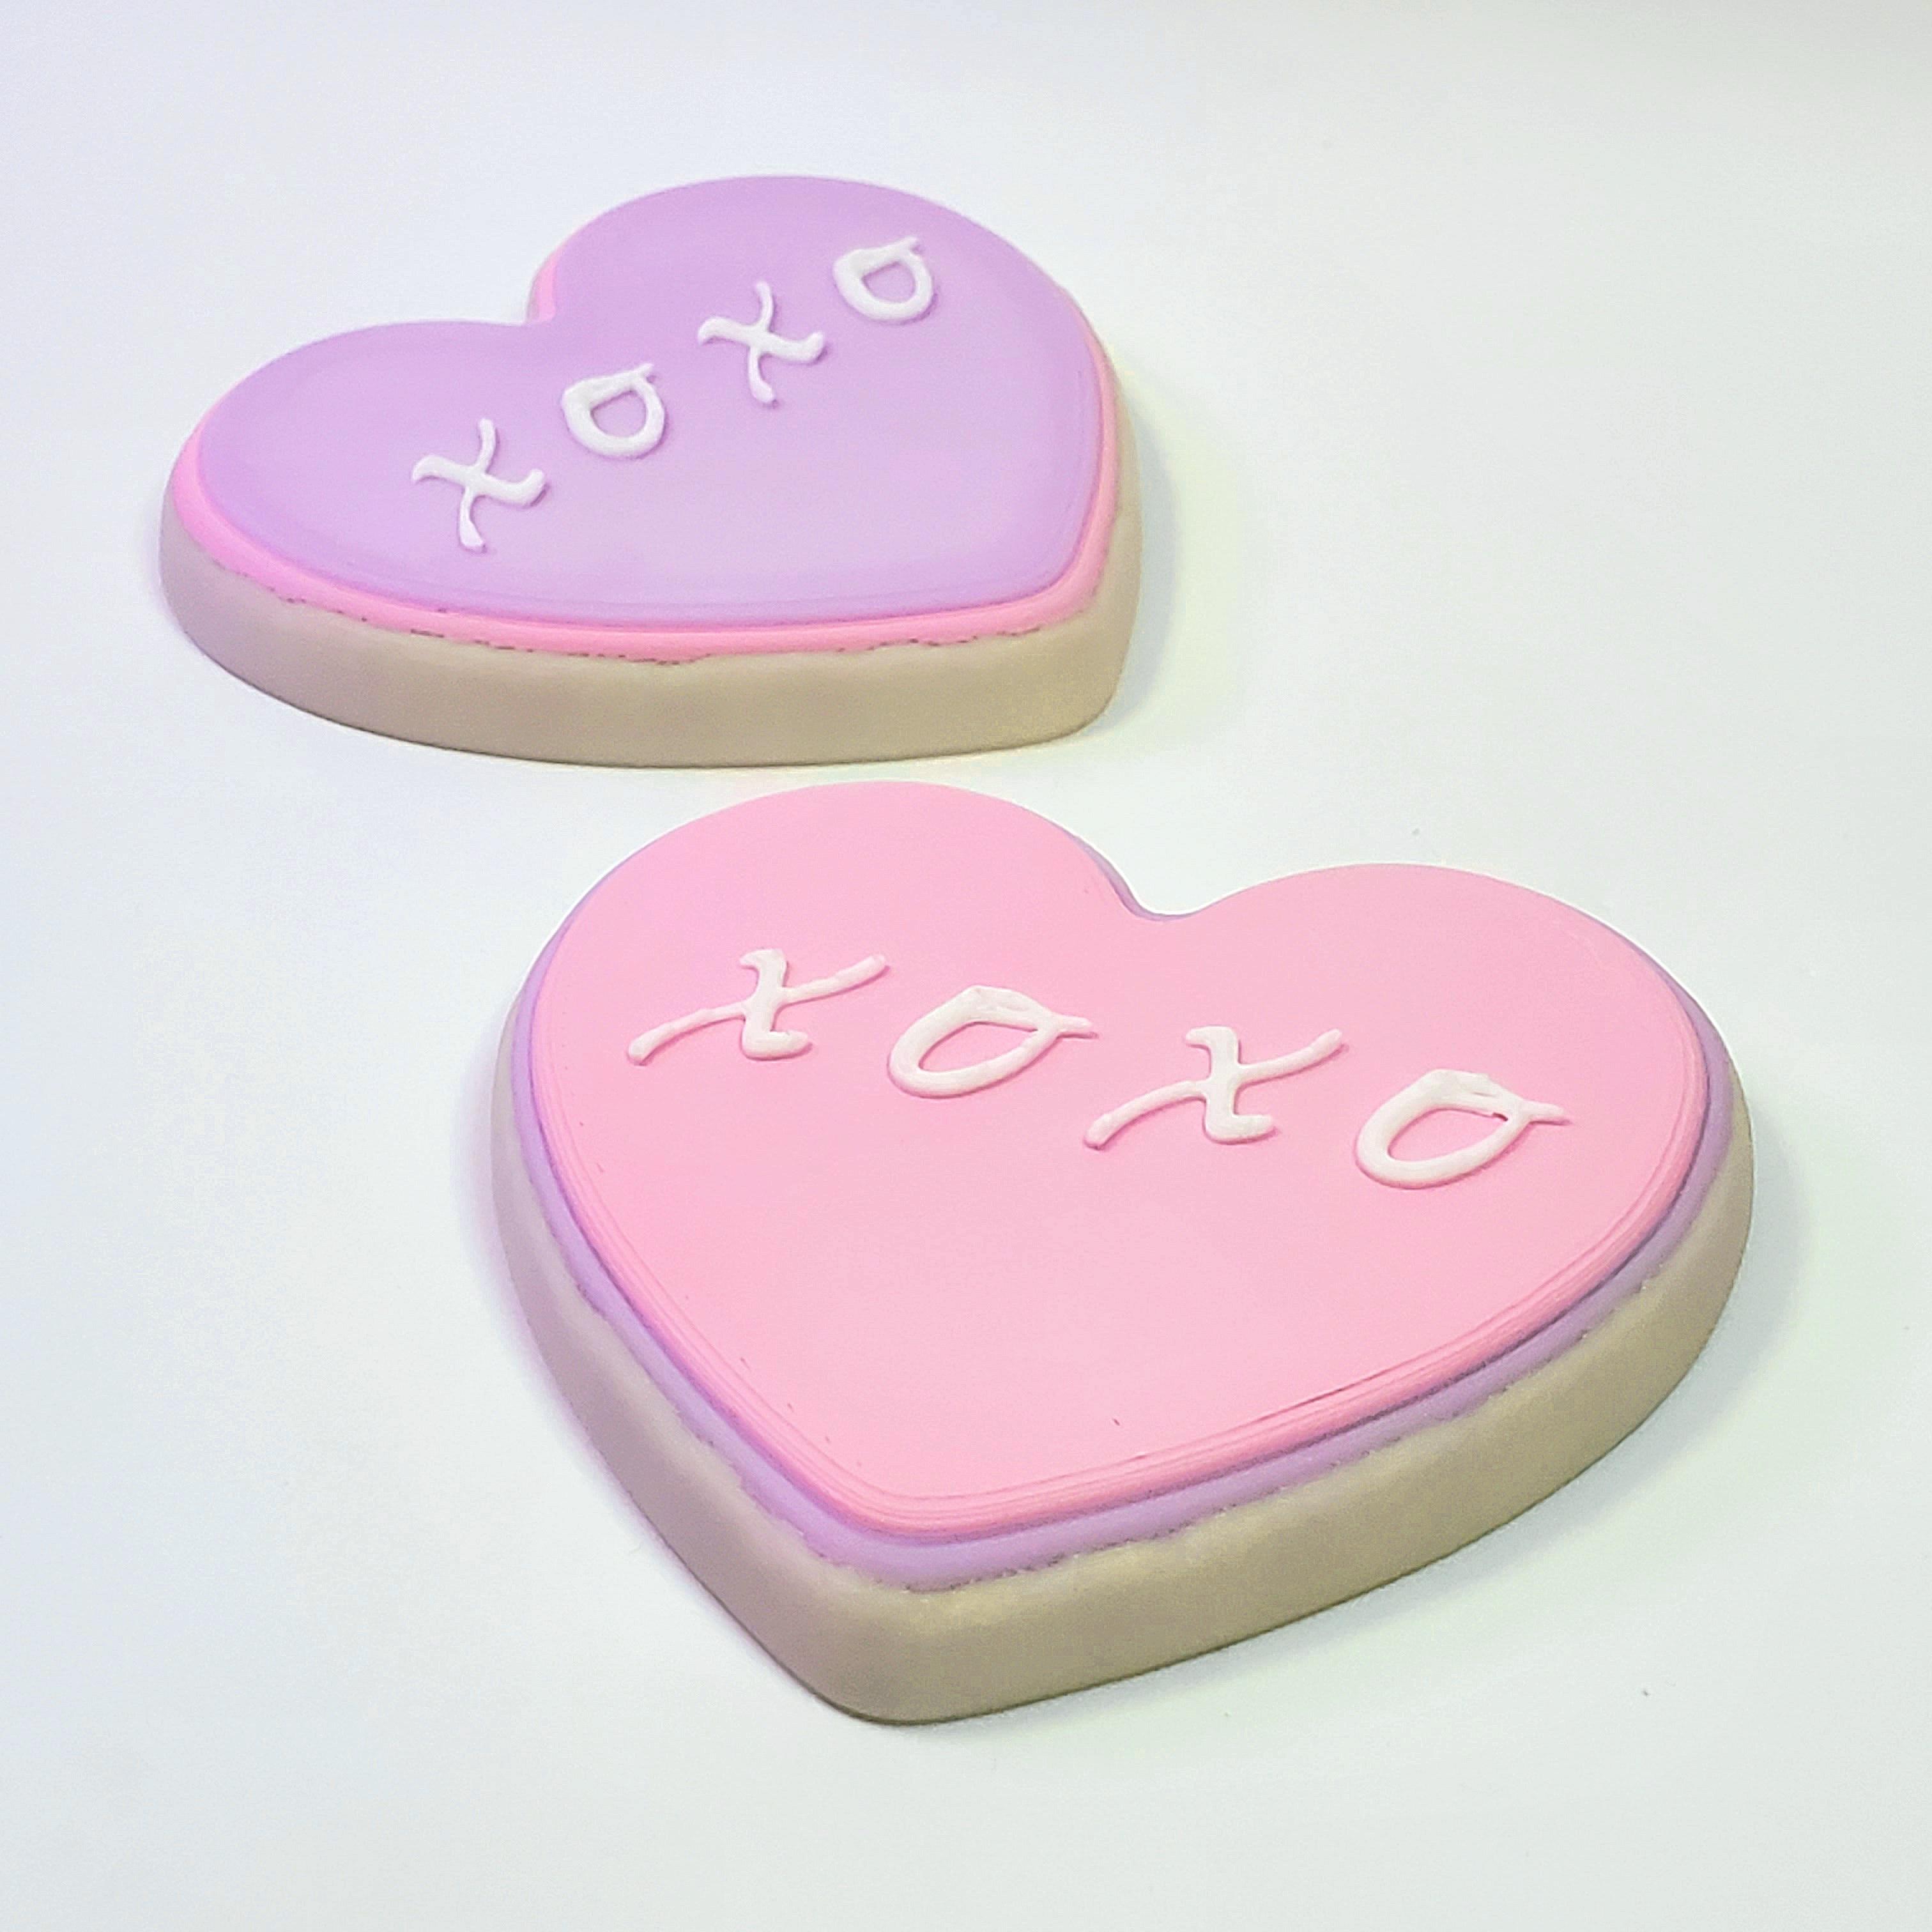 'XOXO' Heart-Shaped Shortbread Cookie with Royal Icing for Valentine's Day :: Delicious Desserts! 3d model